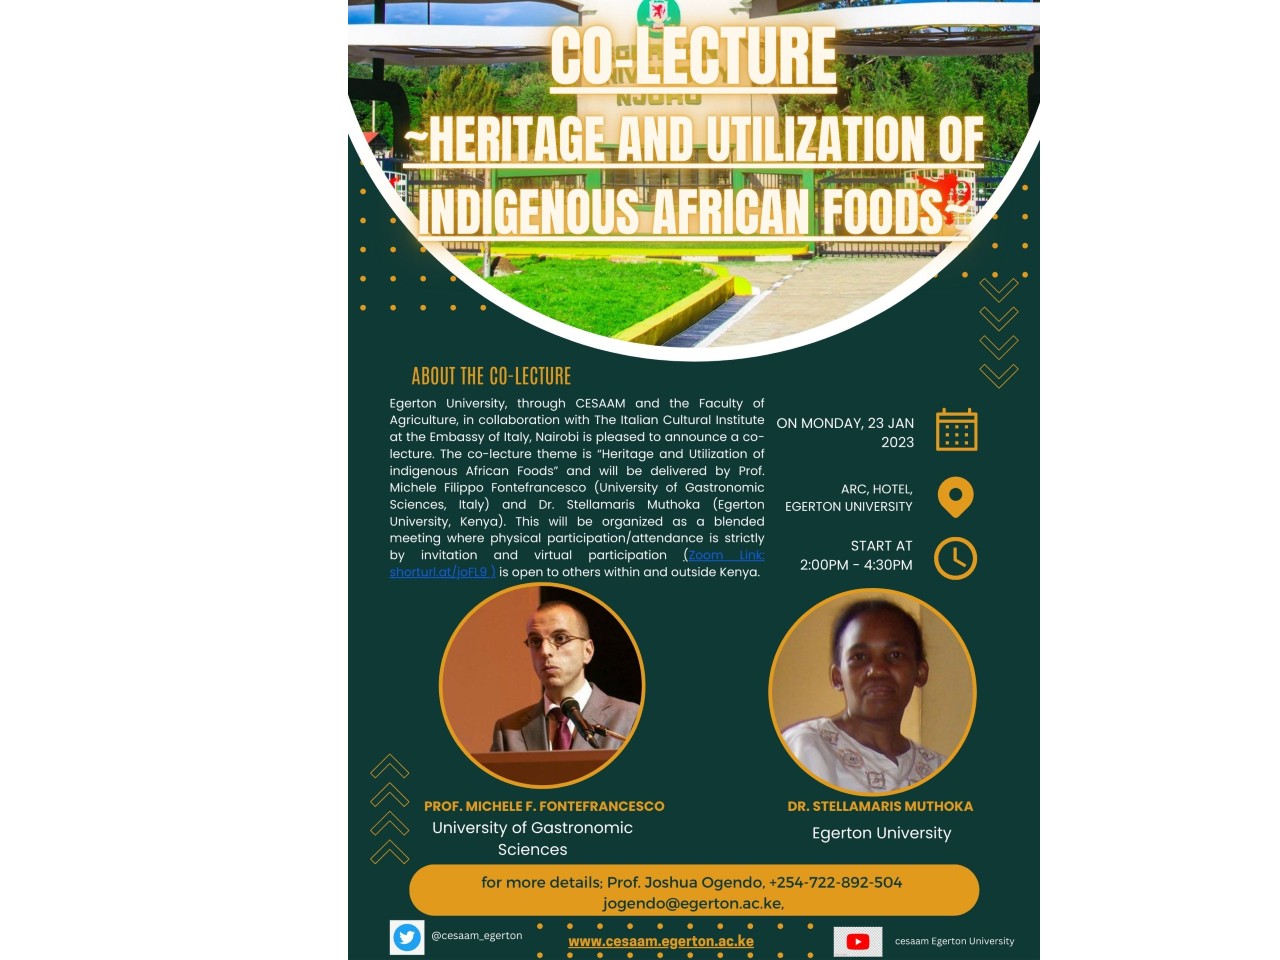 Co-lecture on Heritage and Utilization of Indigenous African Foods